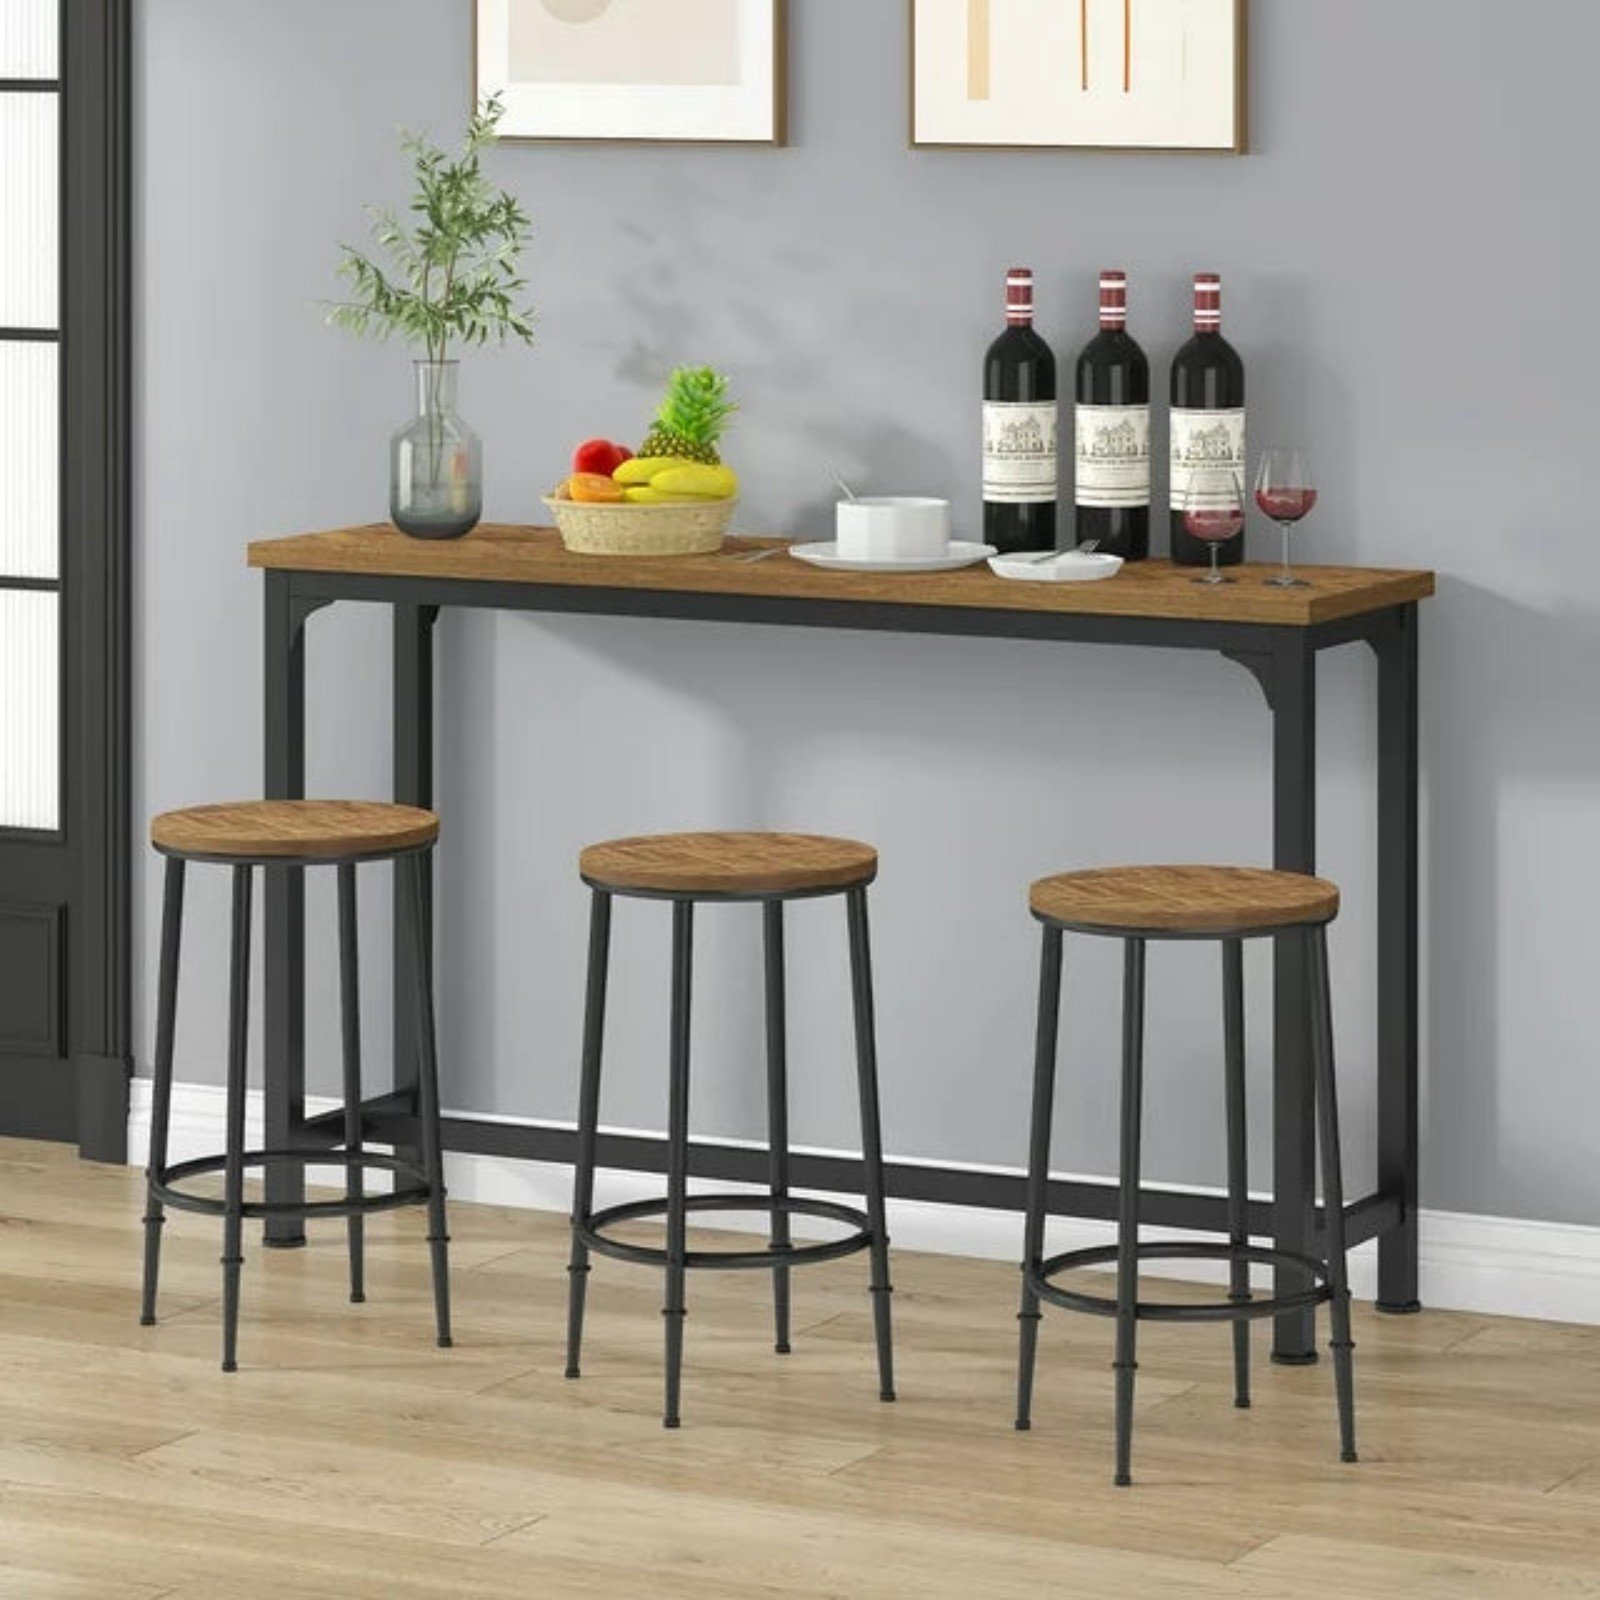 HOMYSHOPY Bar Table Set for 3, Kitchen Counter Height Table with 3 Stools, Brown ASwfayDCG